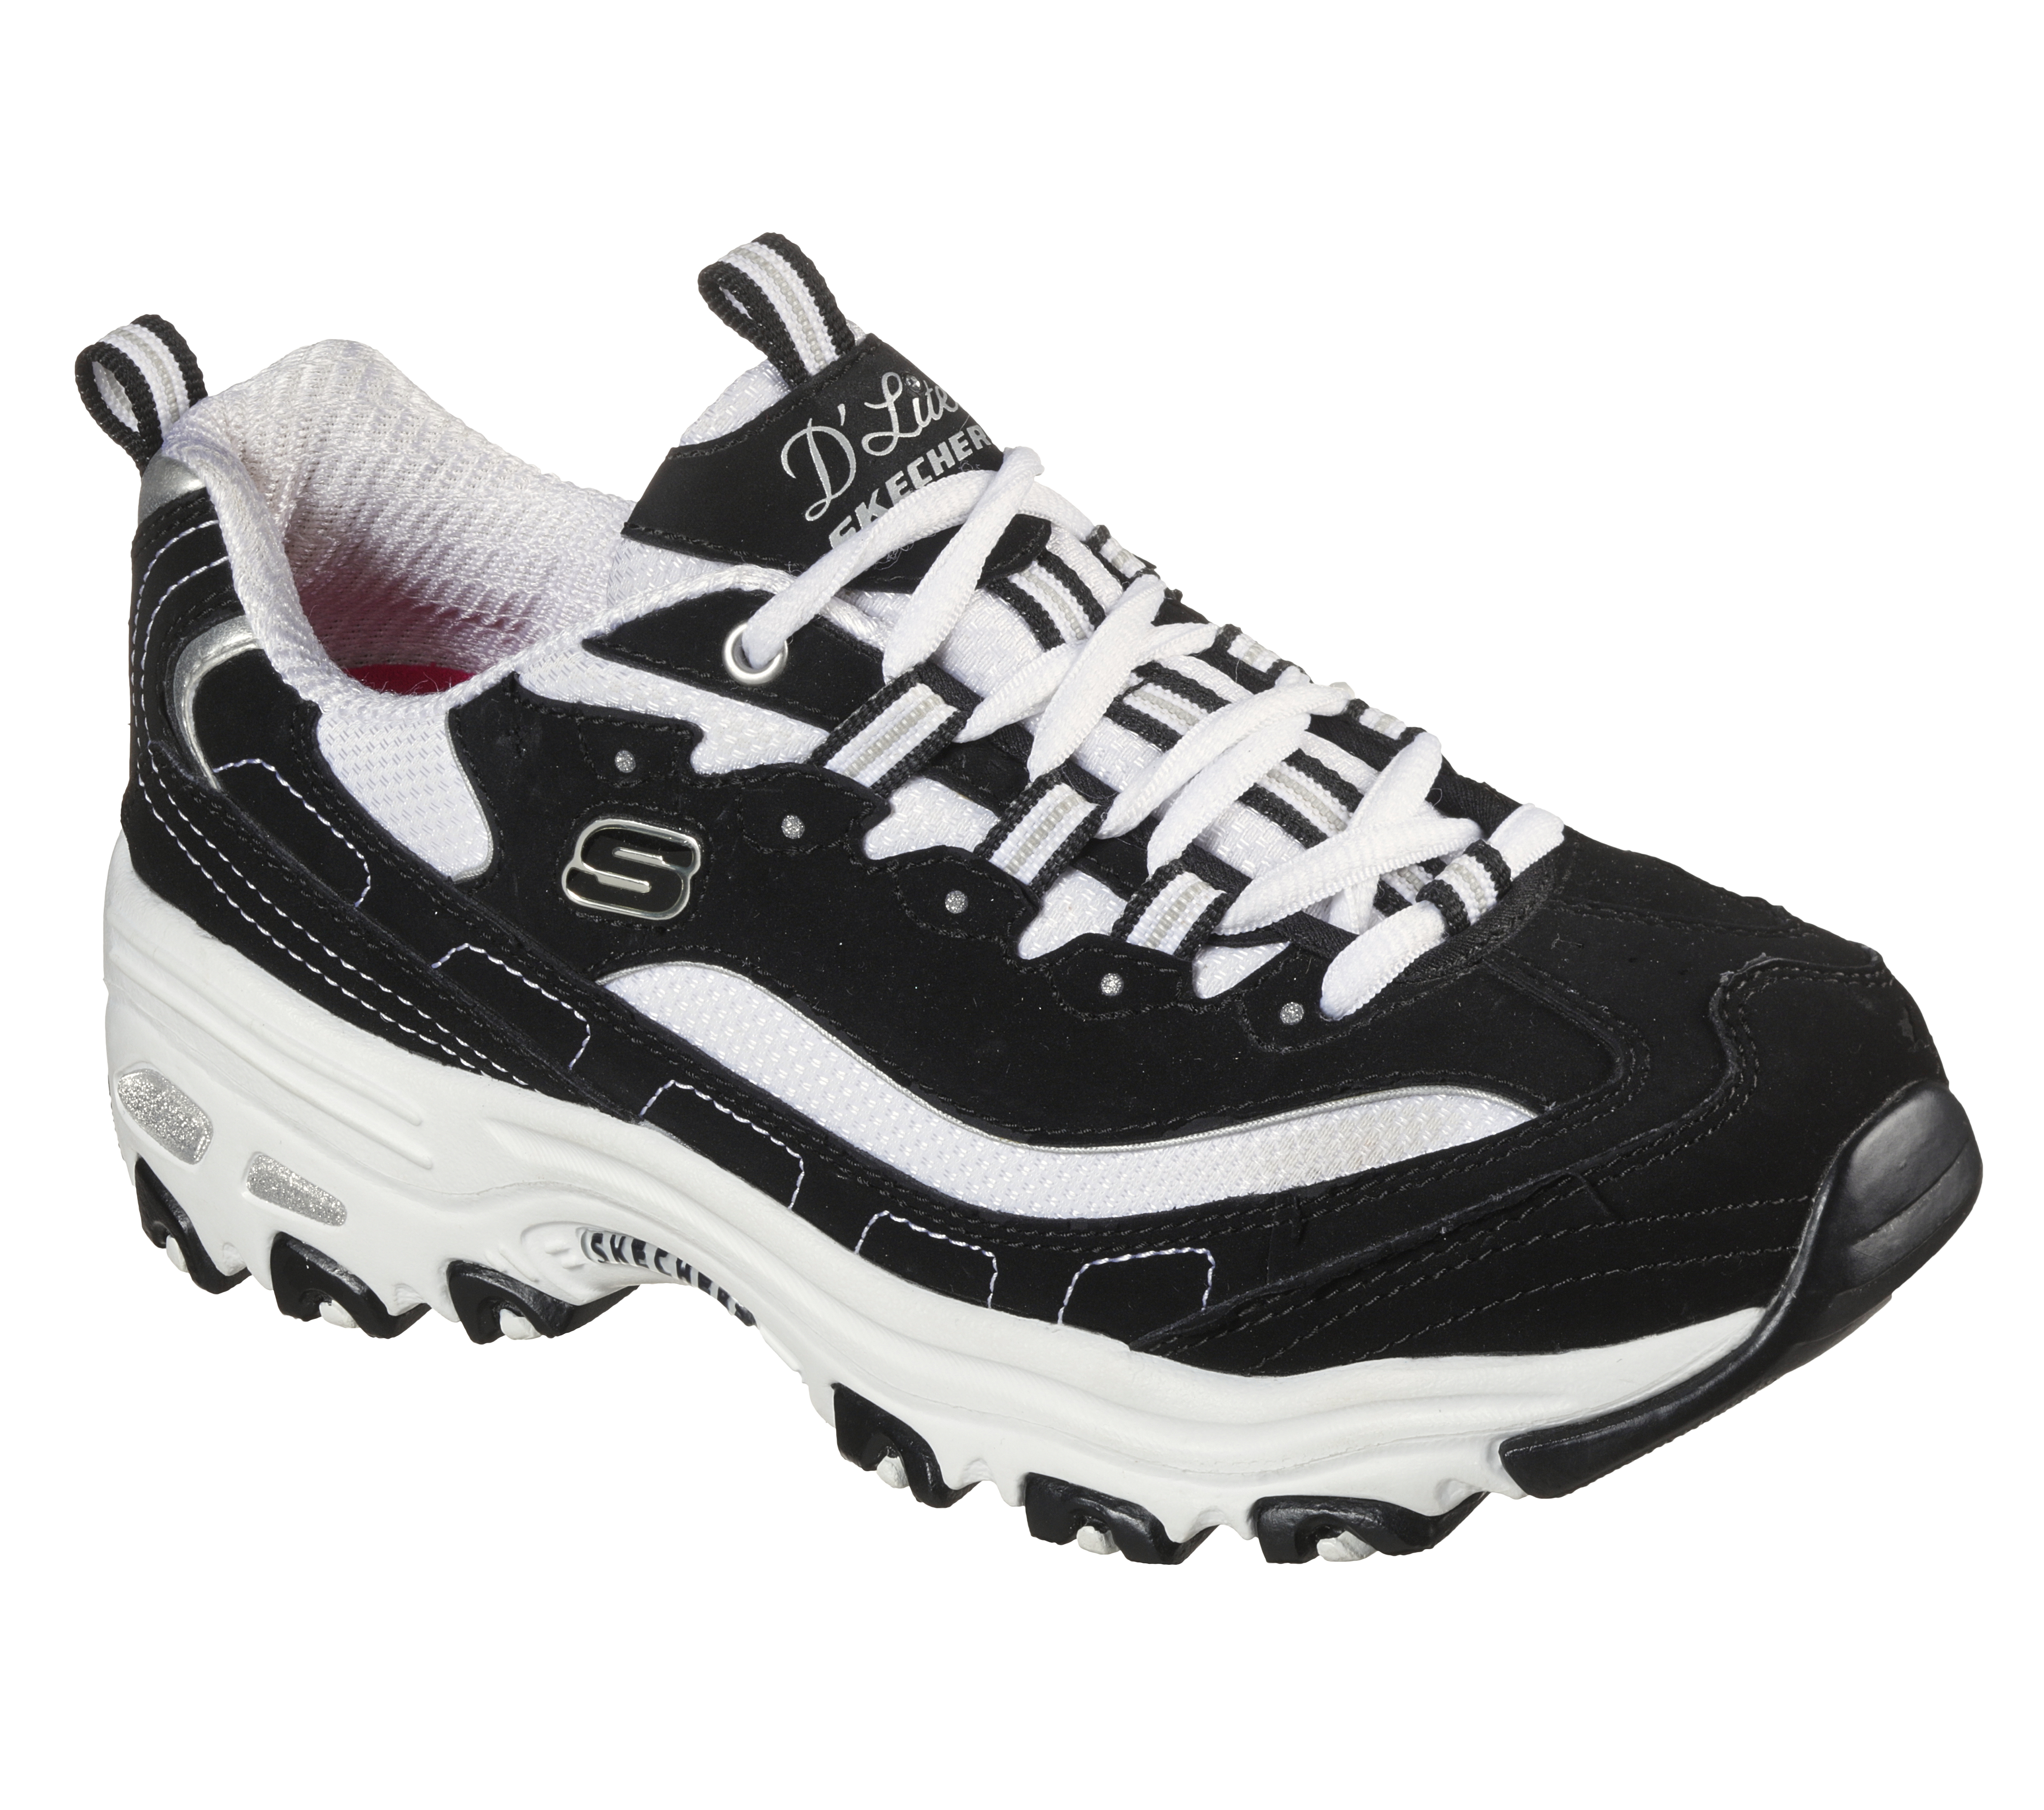 skechers white womens shoes